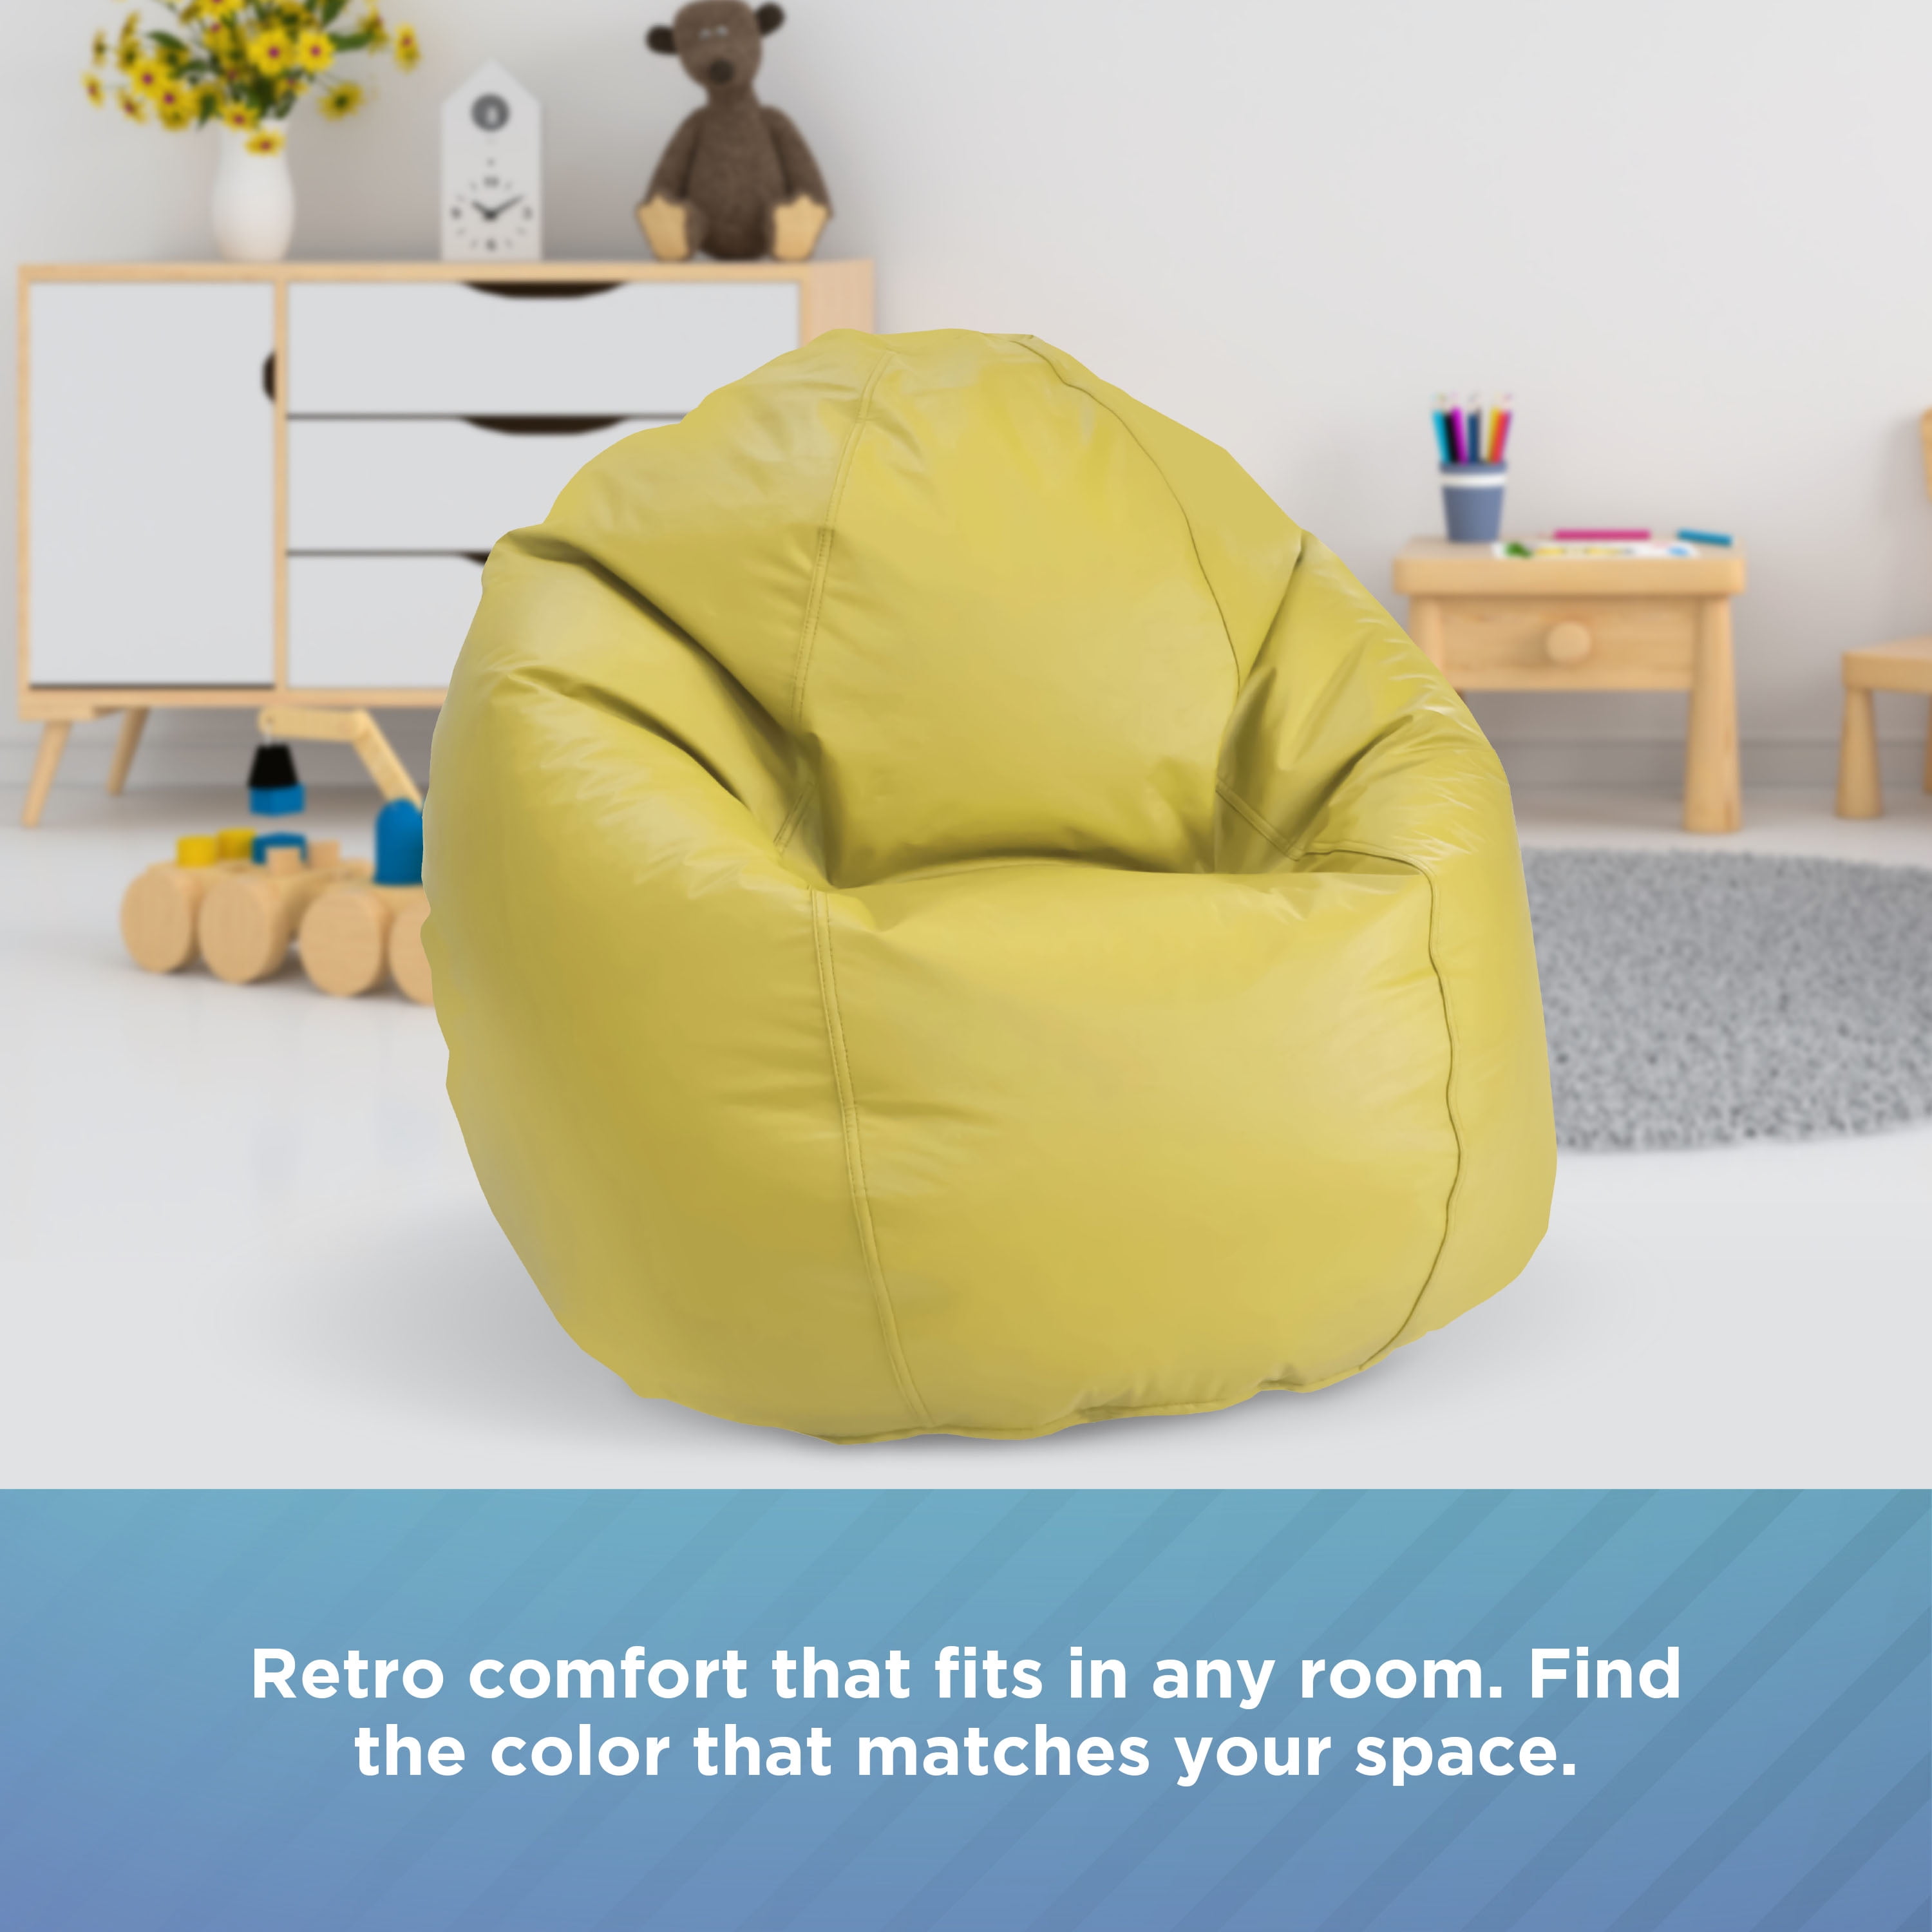 Bean Products Vinyl Bean Bag Chair With Polystyrene Beads And CertiPUR  Foam, 36”W, 36”L, 40”H, 20lb